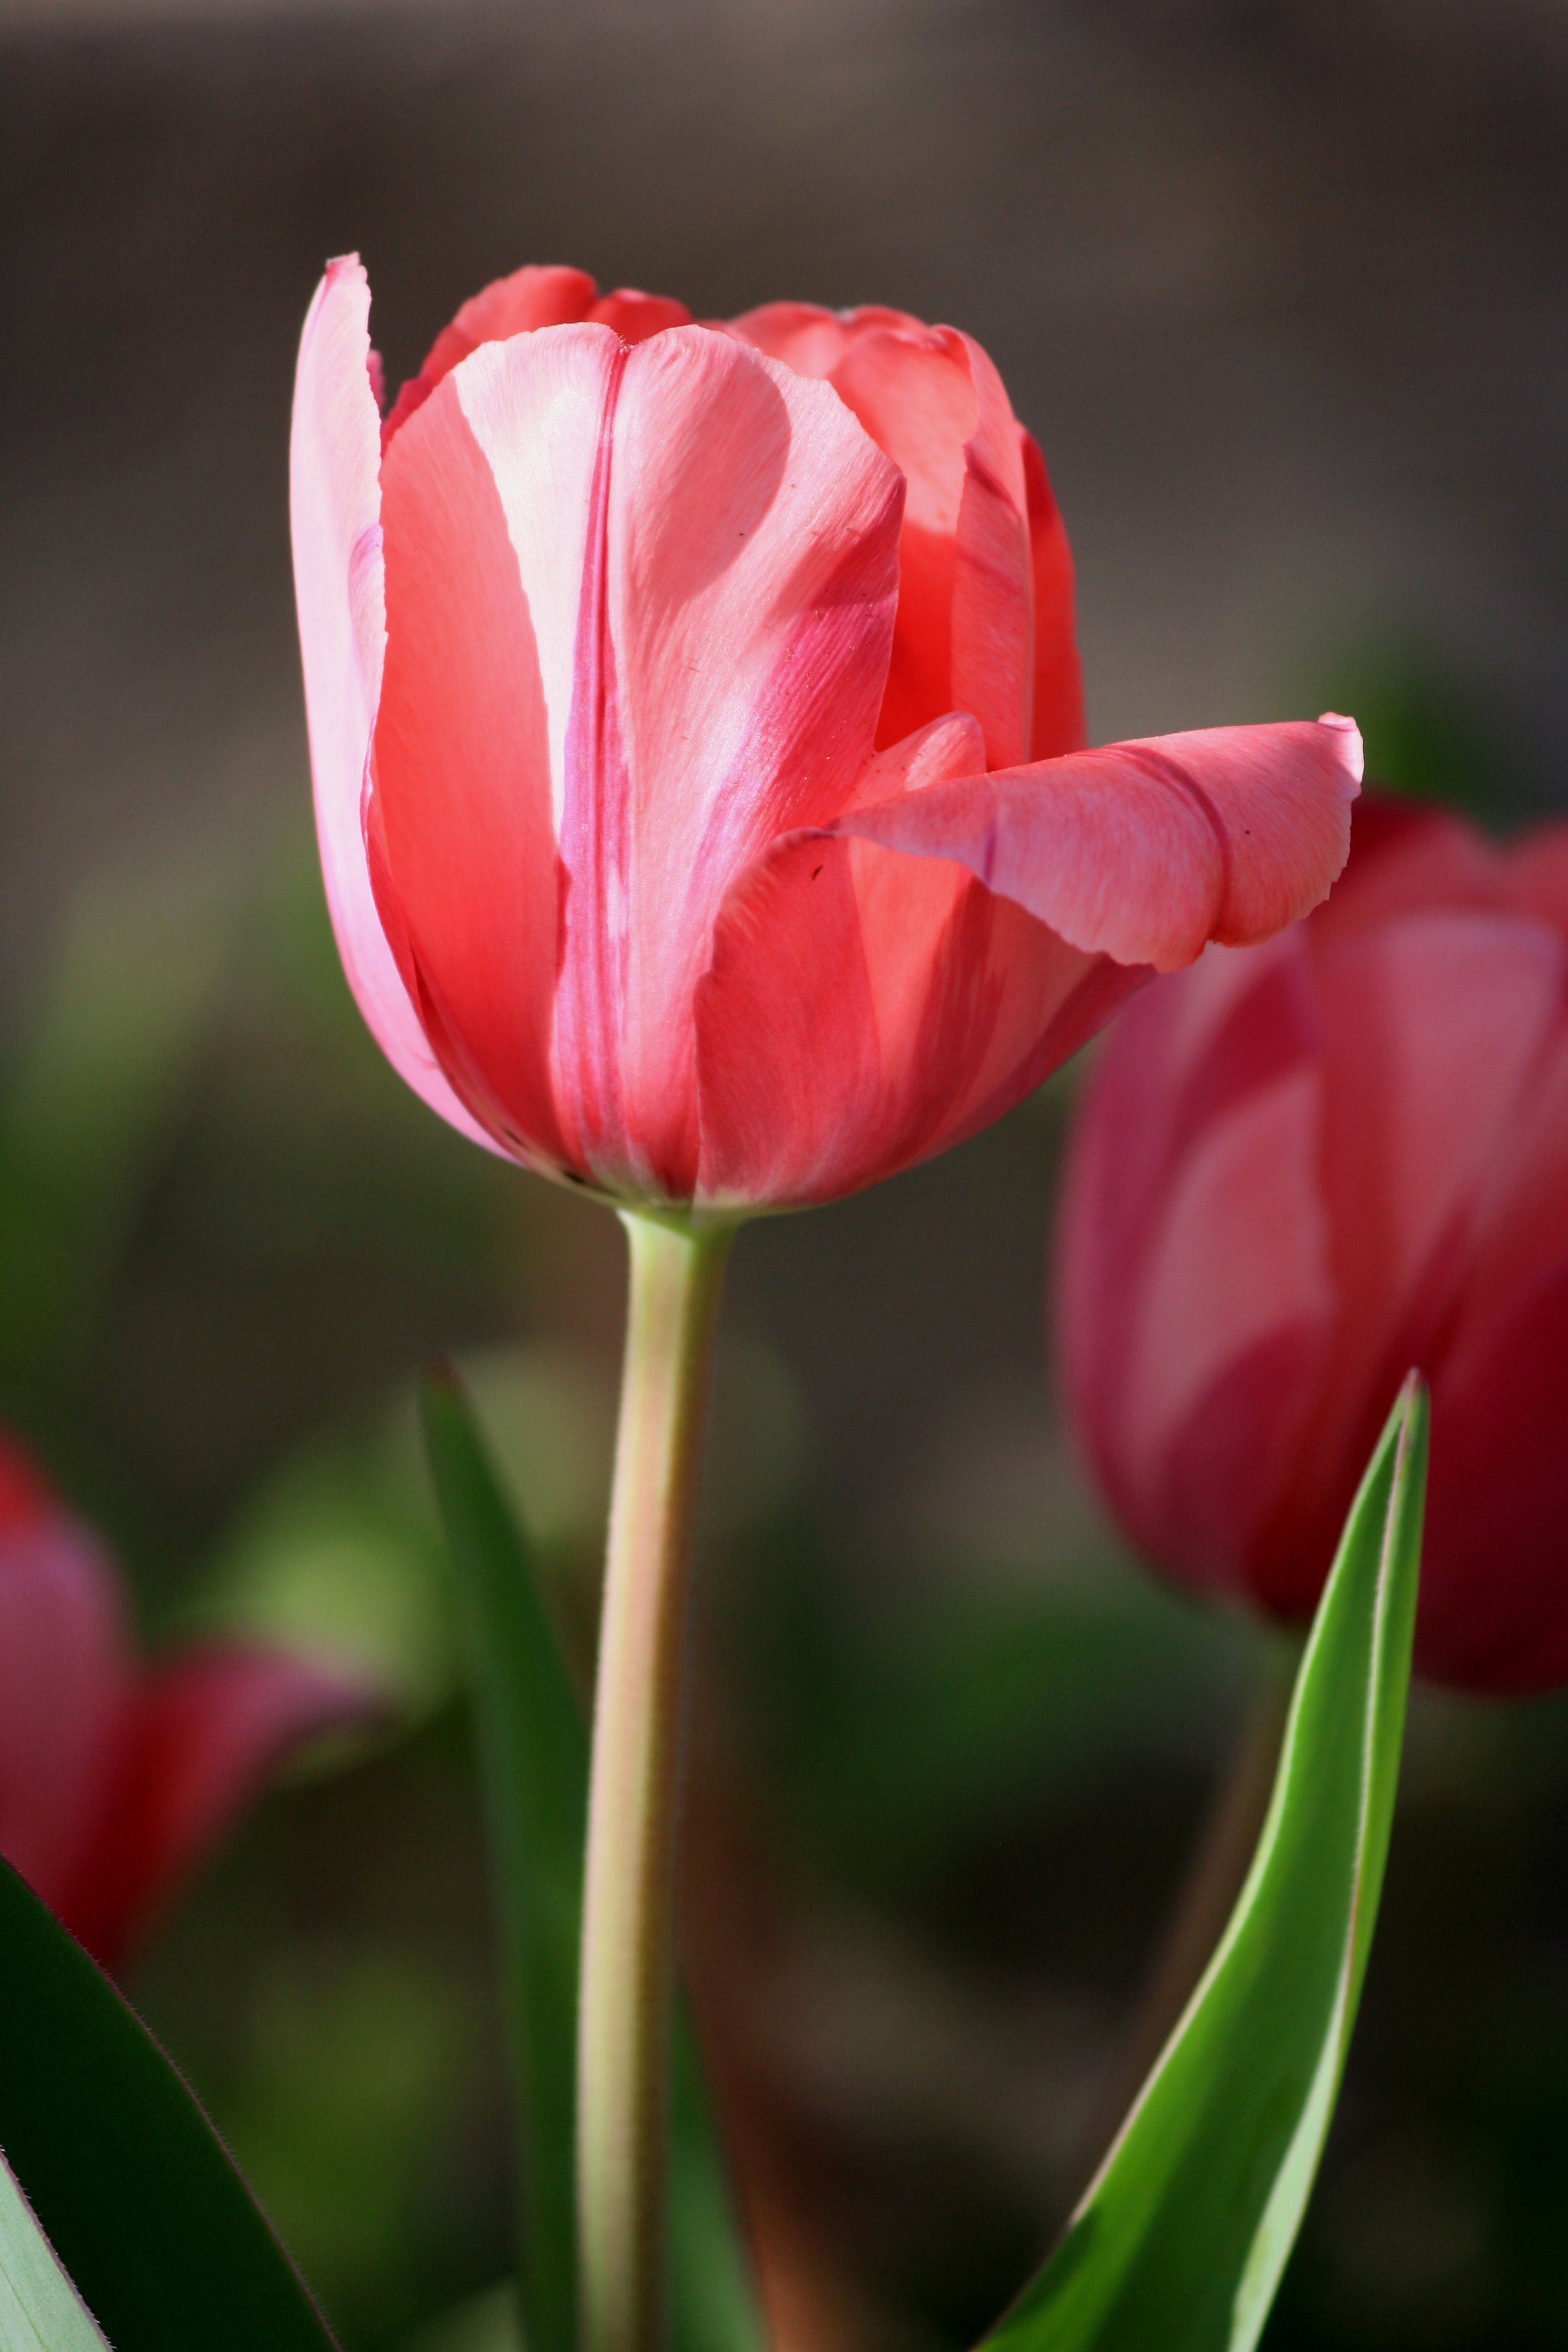 Pink Tulip with One Petal Open Picture | Free Photograph | Photos ...